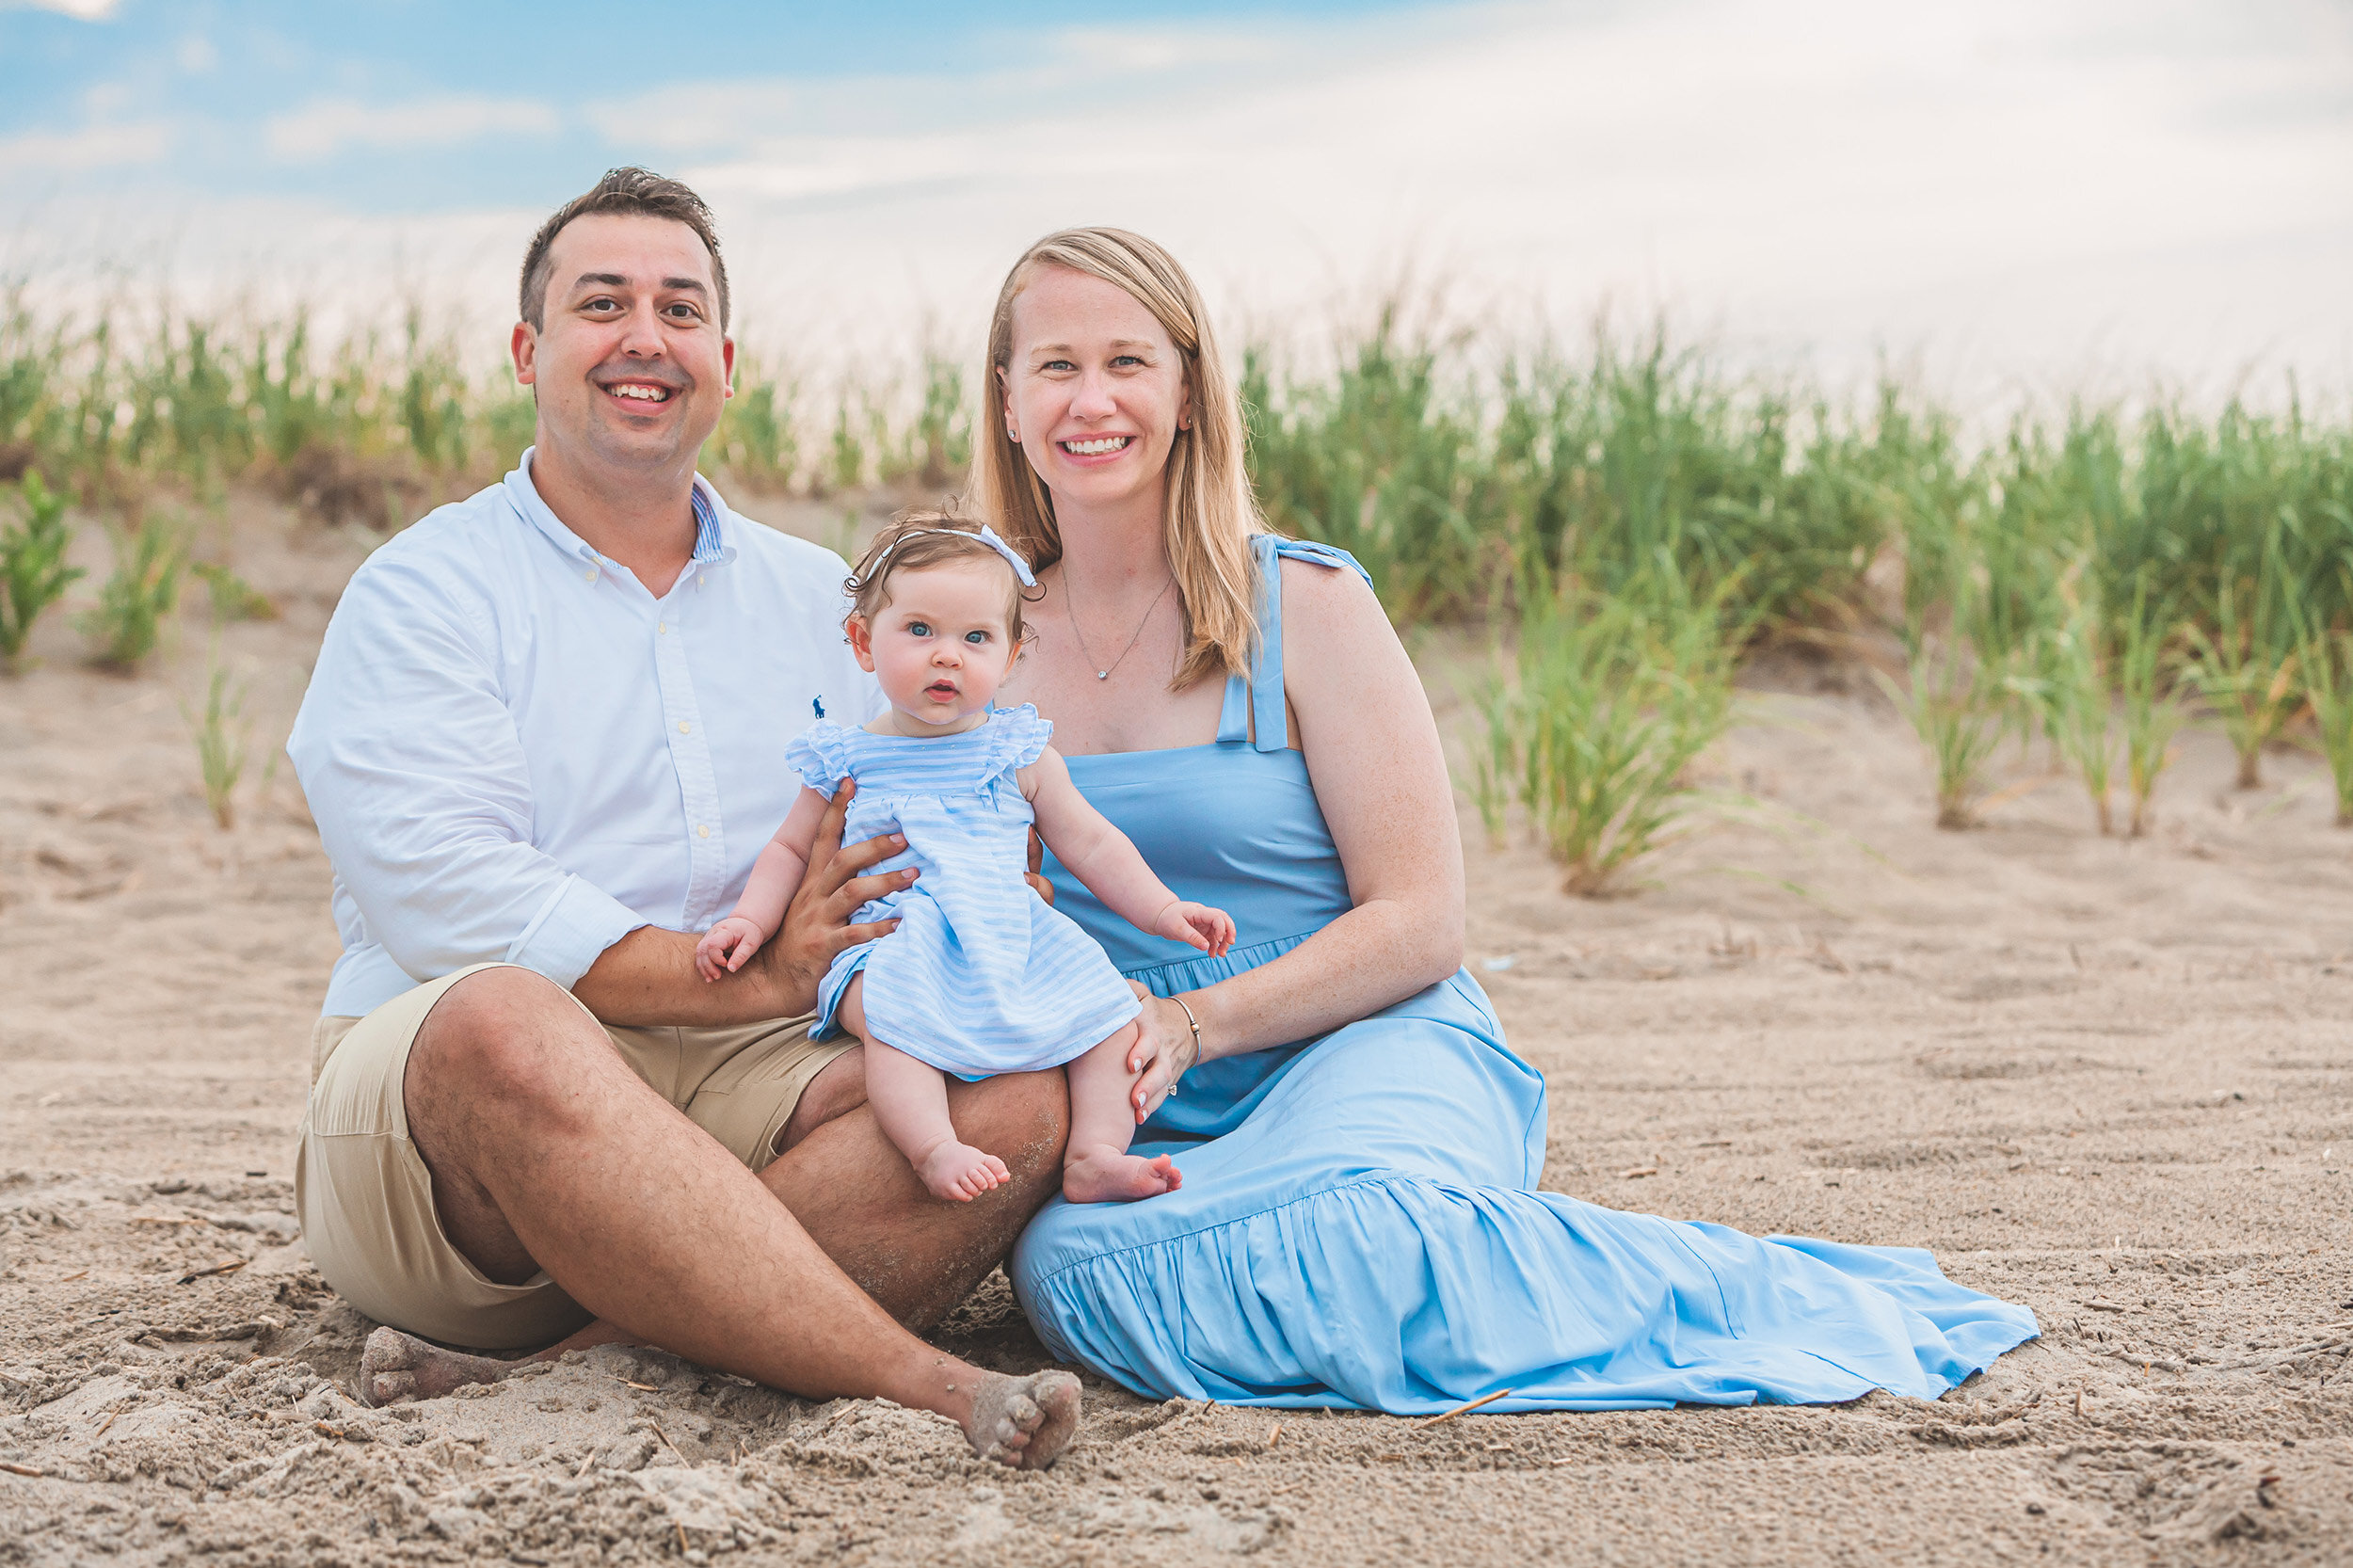 Seabrook Family Pictures | Stephen Grant Photography